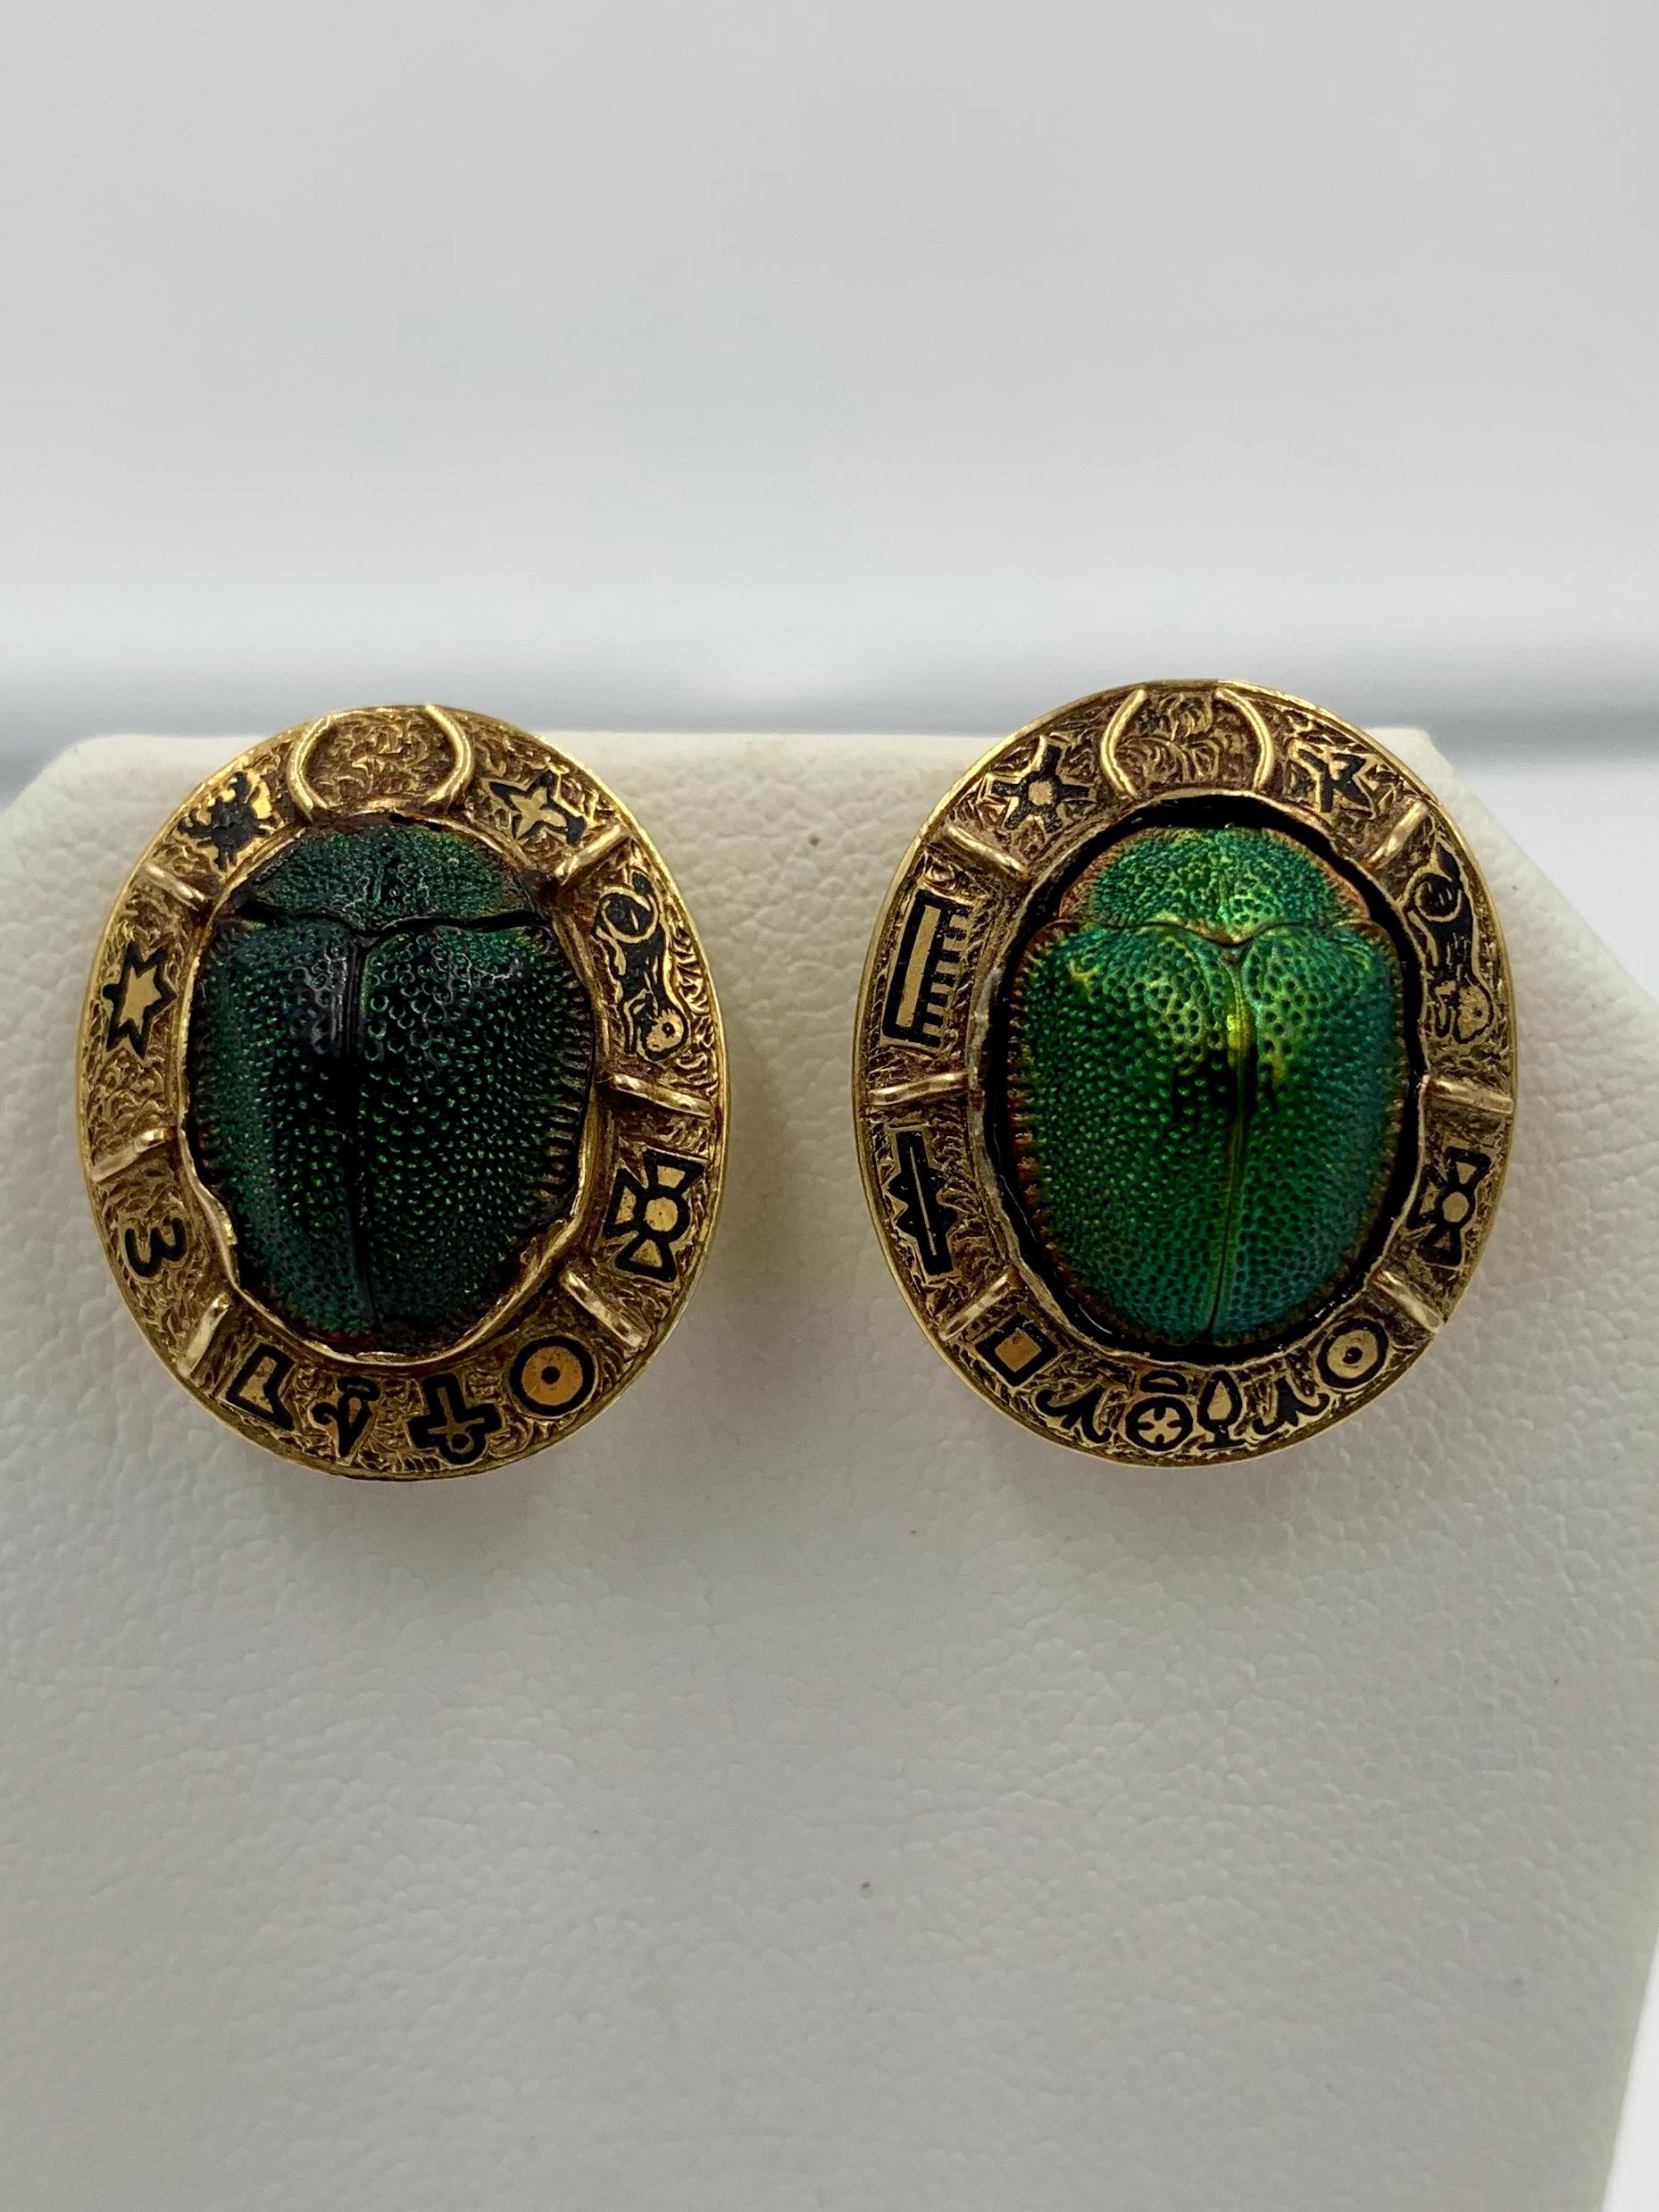 Belle Epoque - Art Deco Egyptian Revival masterpieces.  The earrings with iridescent green natural Scarab insects in the center surrounded by a stunning 14-16 Karat Gold border with Egyptian Hieroglyphic inspired motifs in black enamel.  The jewels